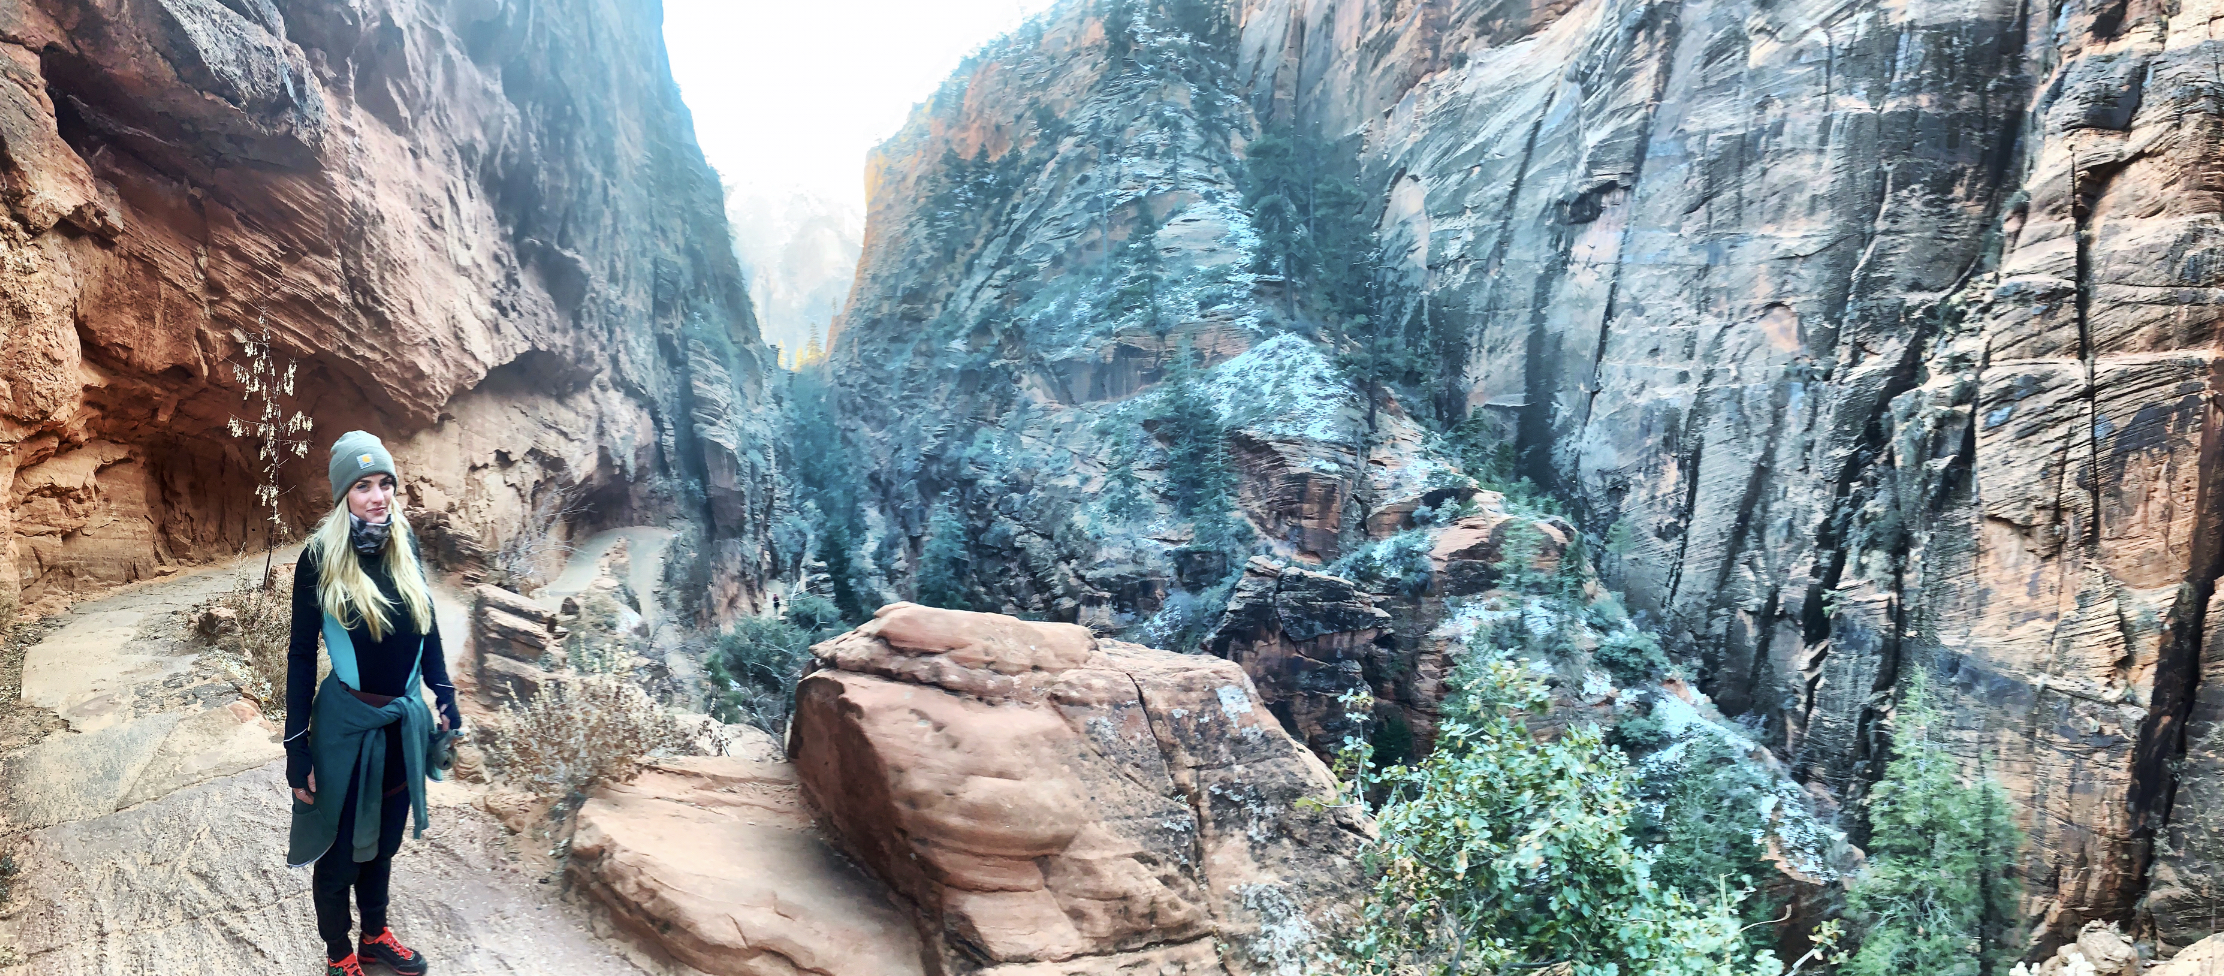 ANOTHER HIKING ADVENTURE ON MY WAY TO RENO IN UTAH AT THE Zion NATIONAL PARK,